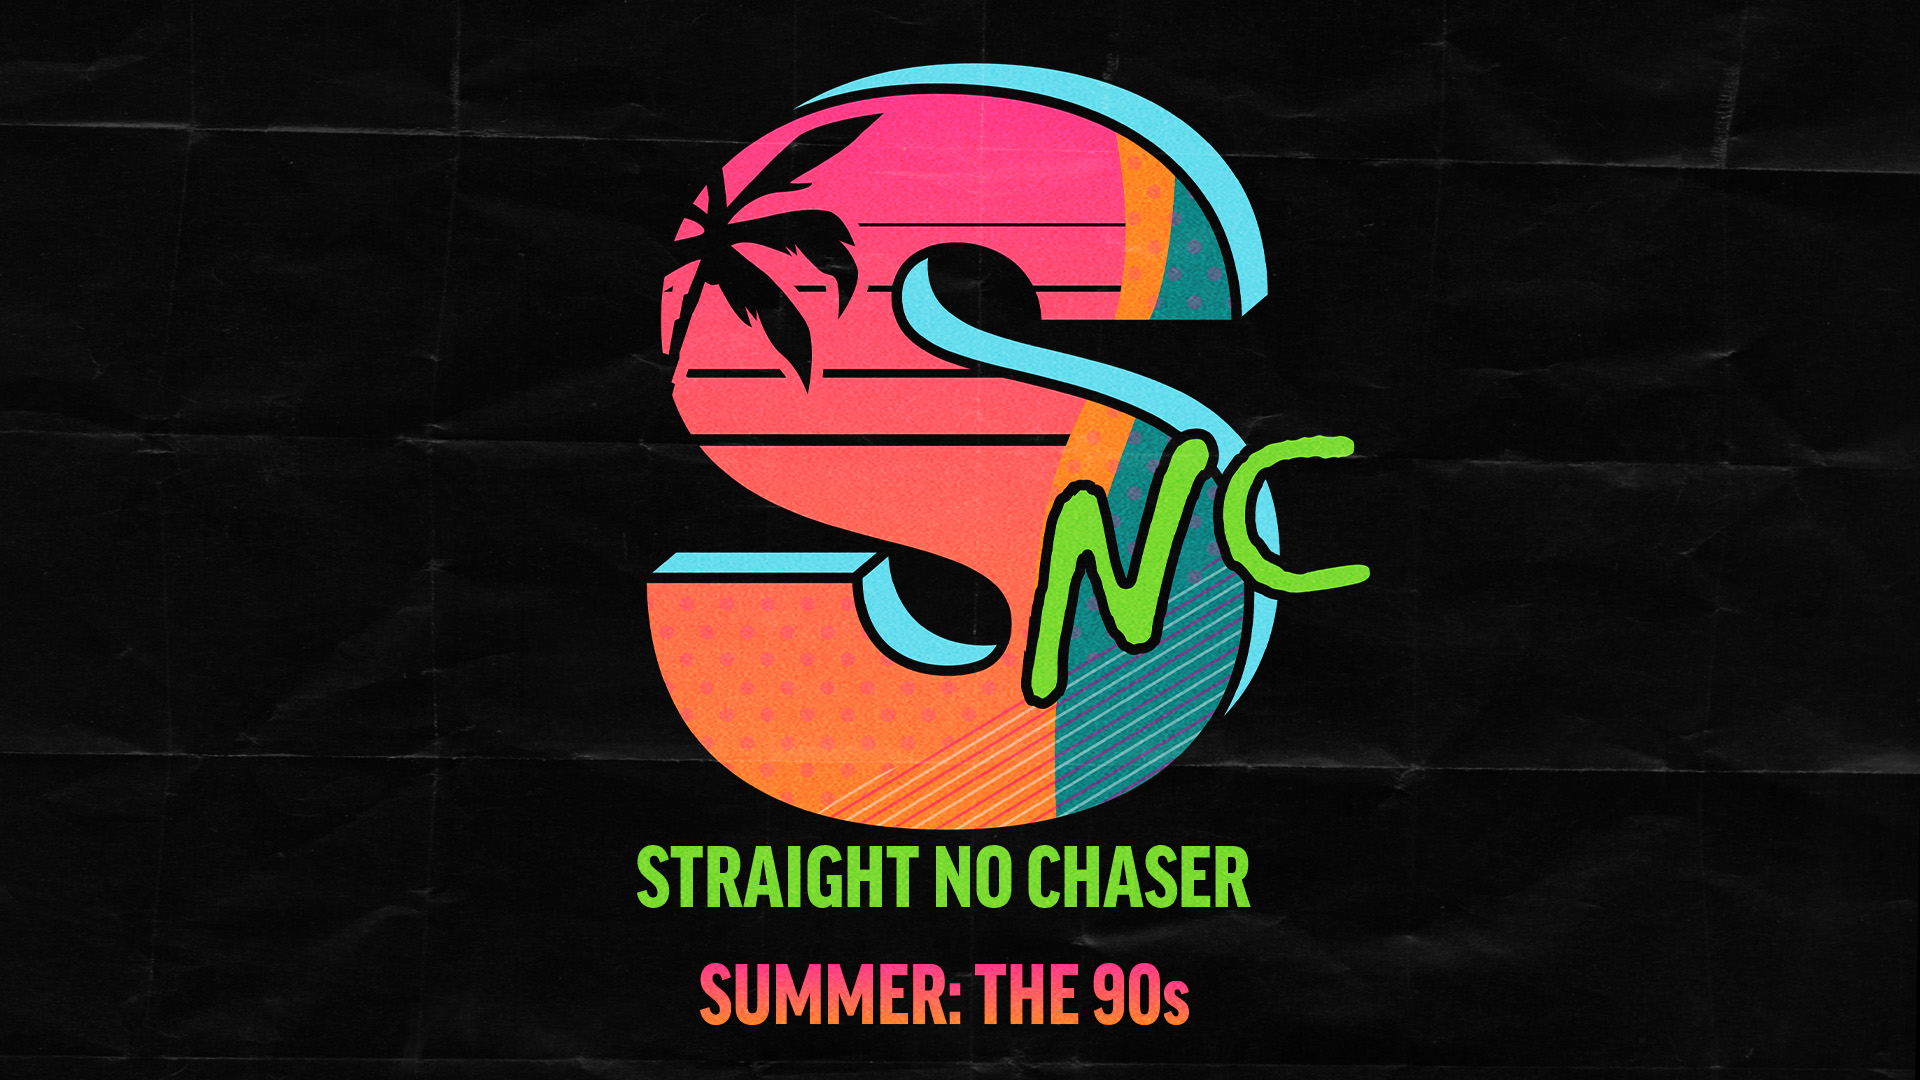 Straight No Chaser Summer 90s